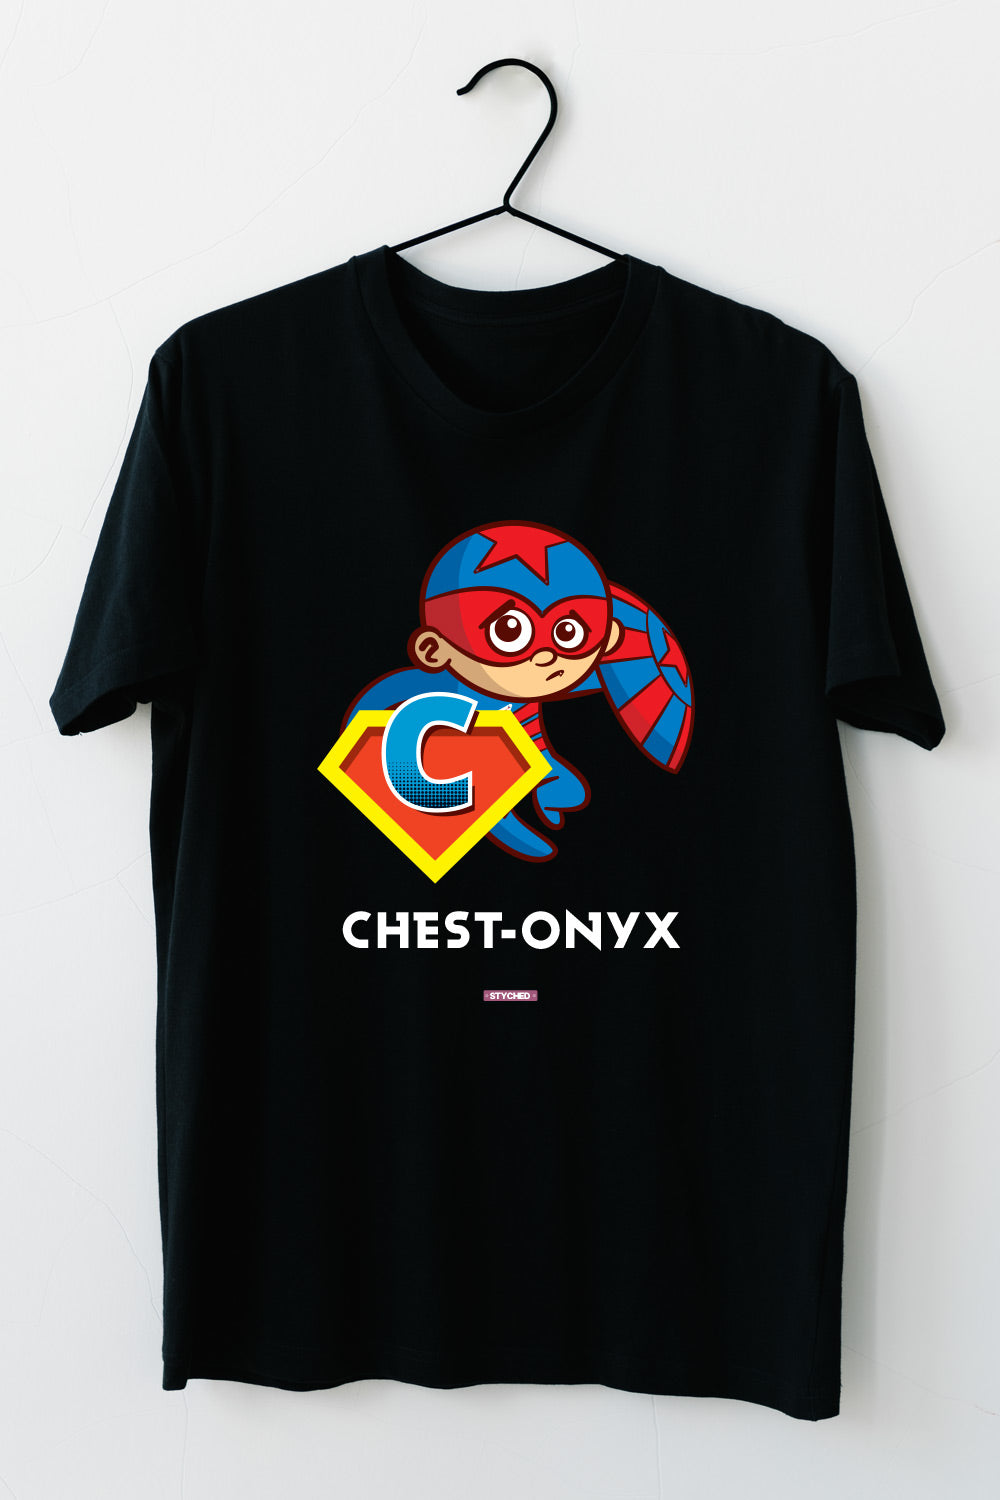 ChestOnyx by Styched Black Dry-Fit T-Shirt